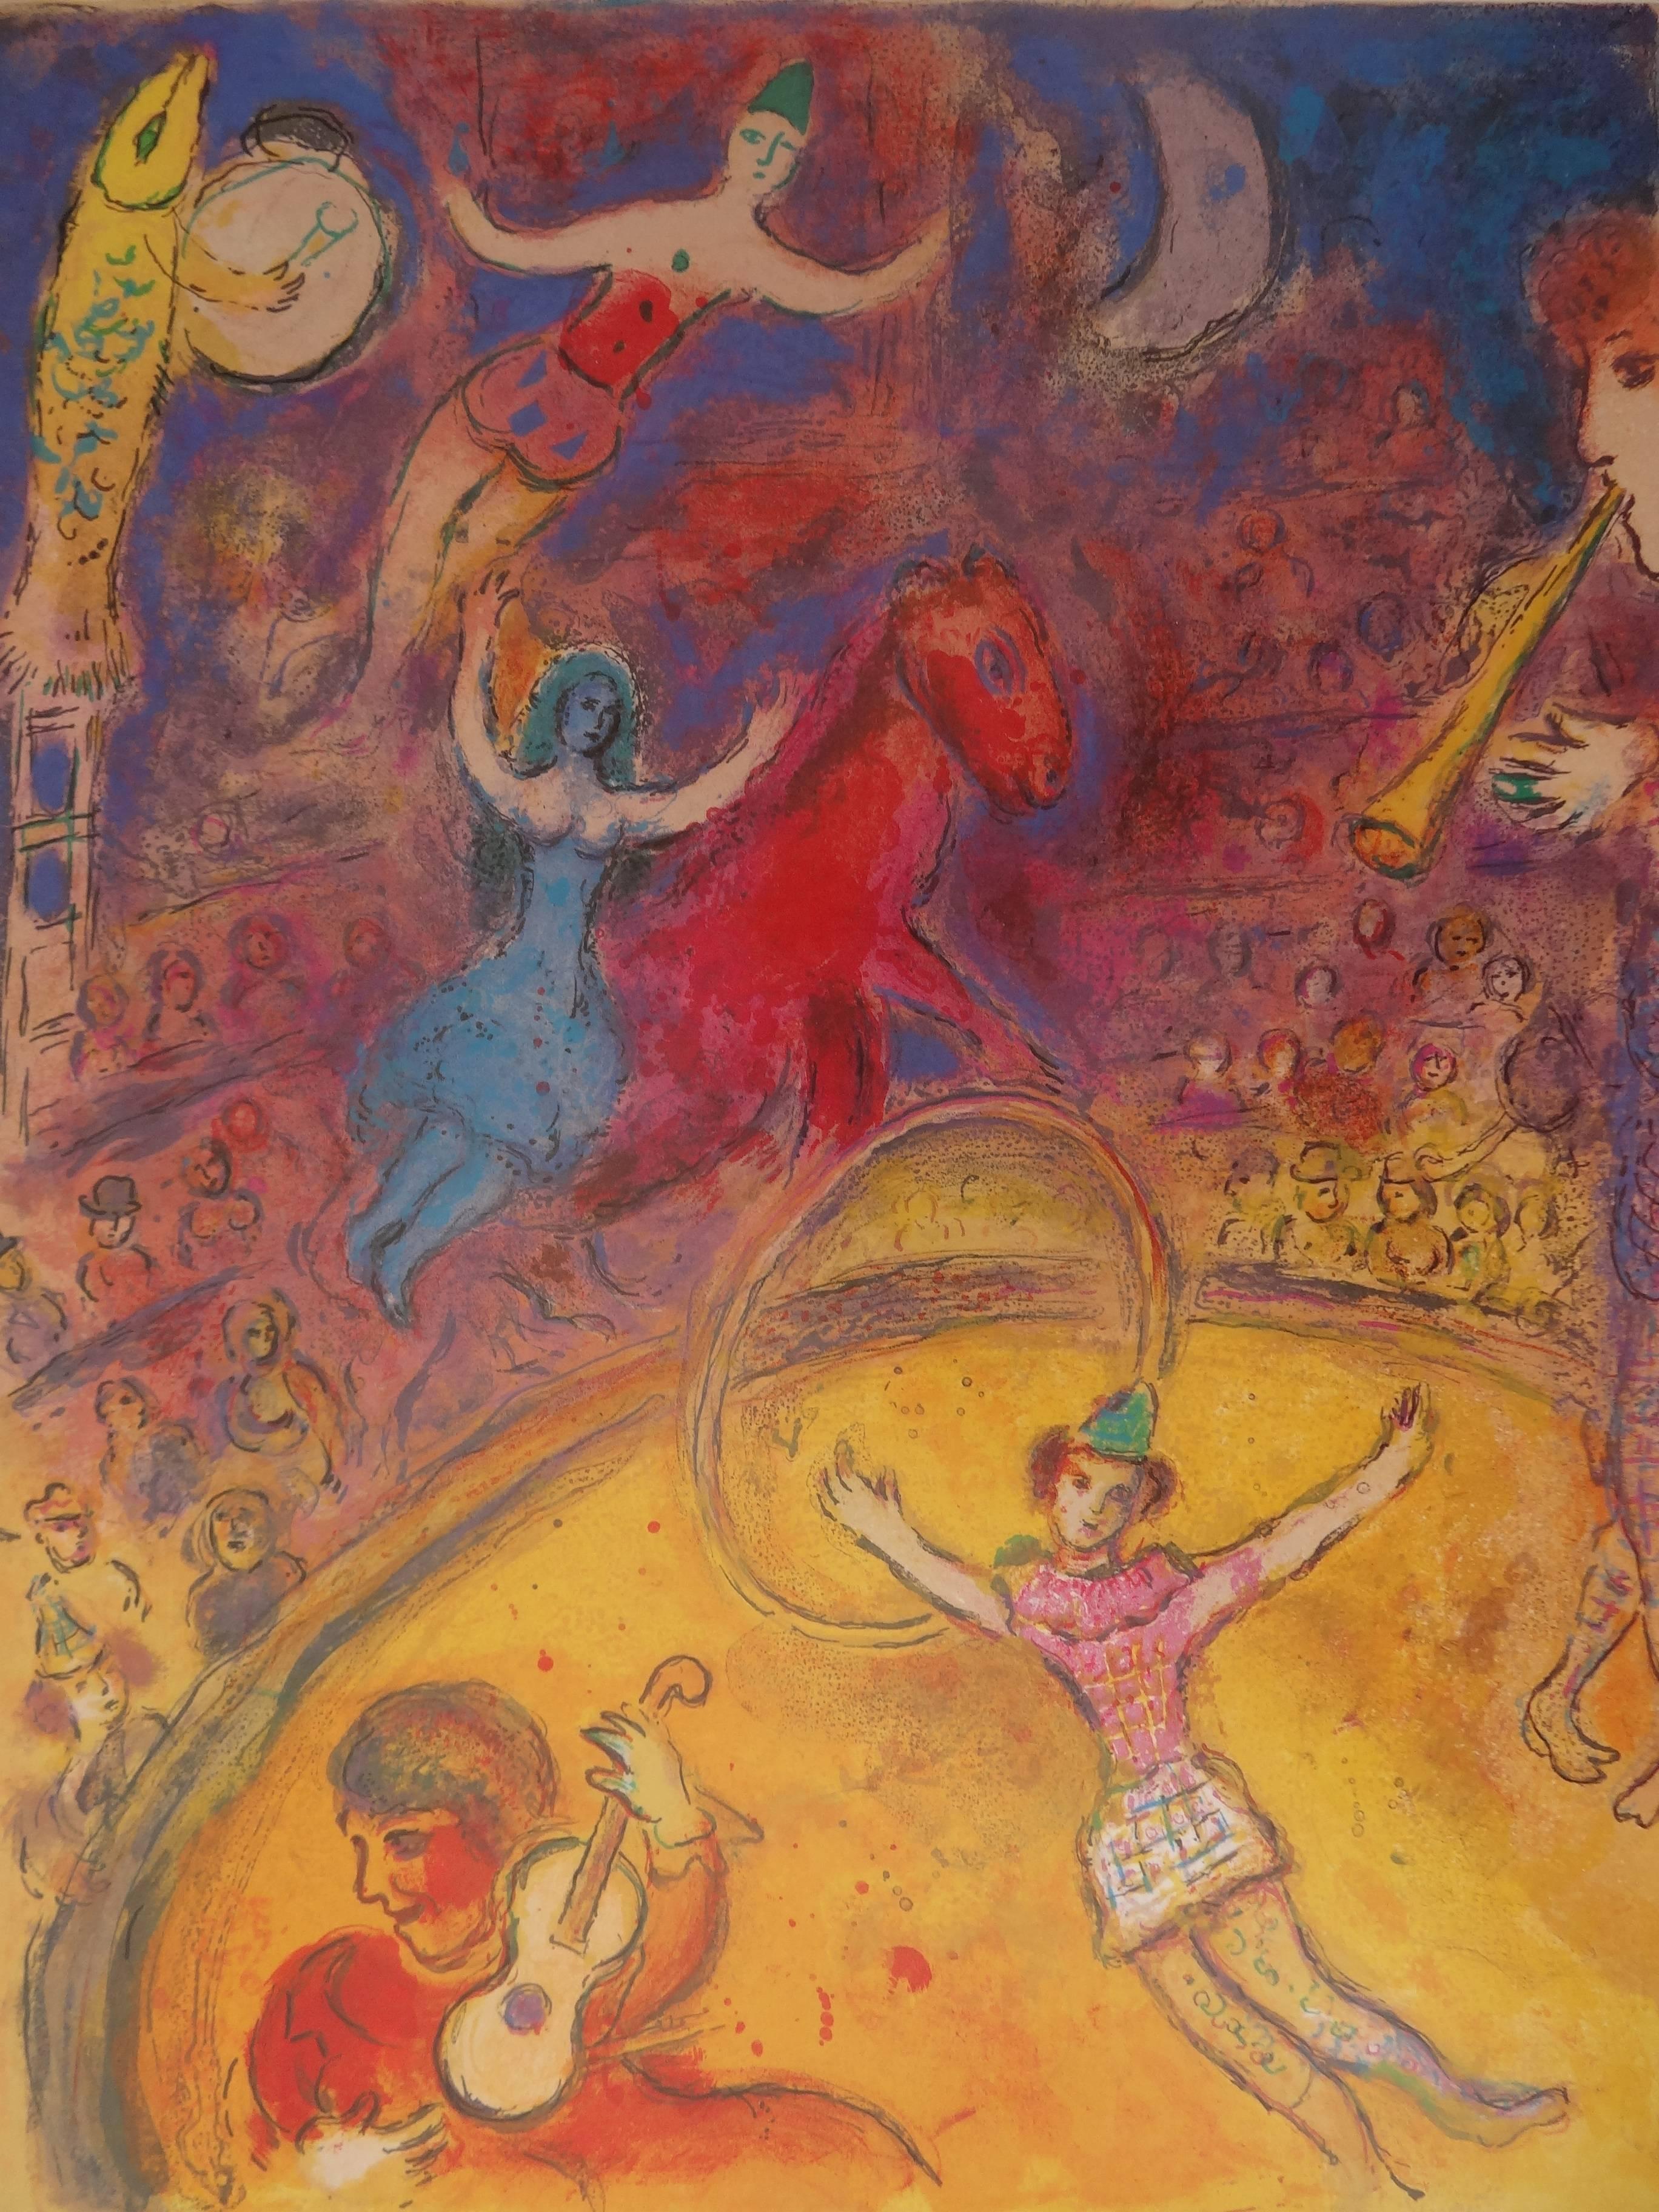 Circus - 25 illustrated books - Vintage poster - 1982 - Print by (after) Marc Chagall